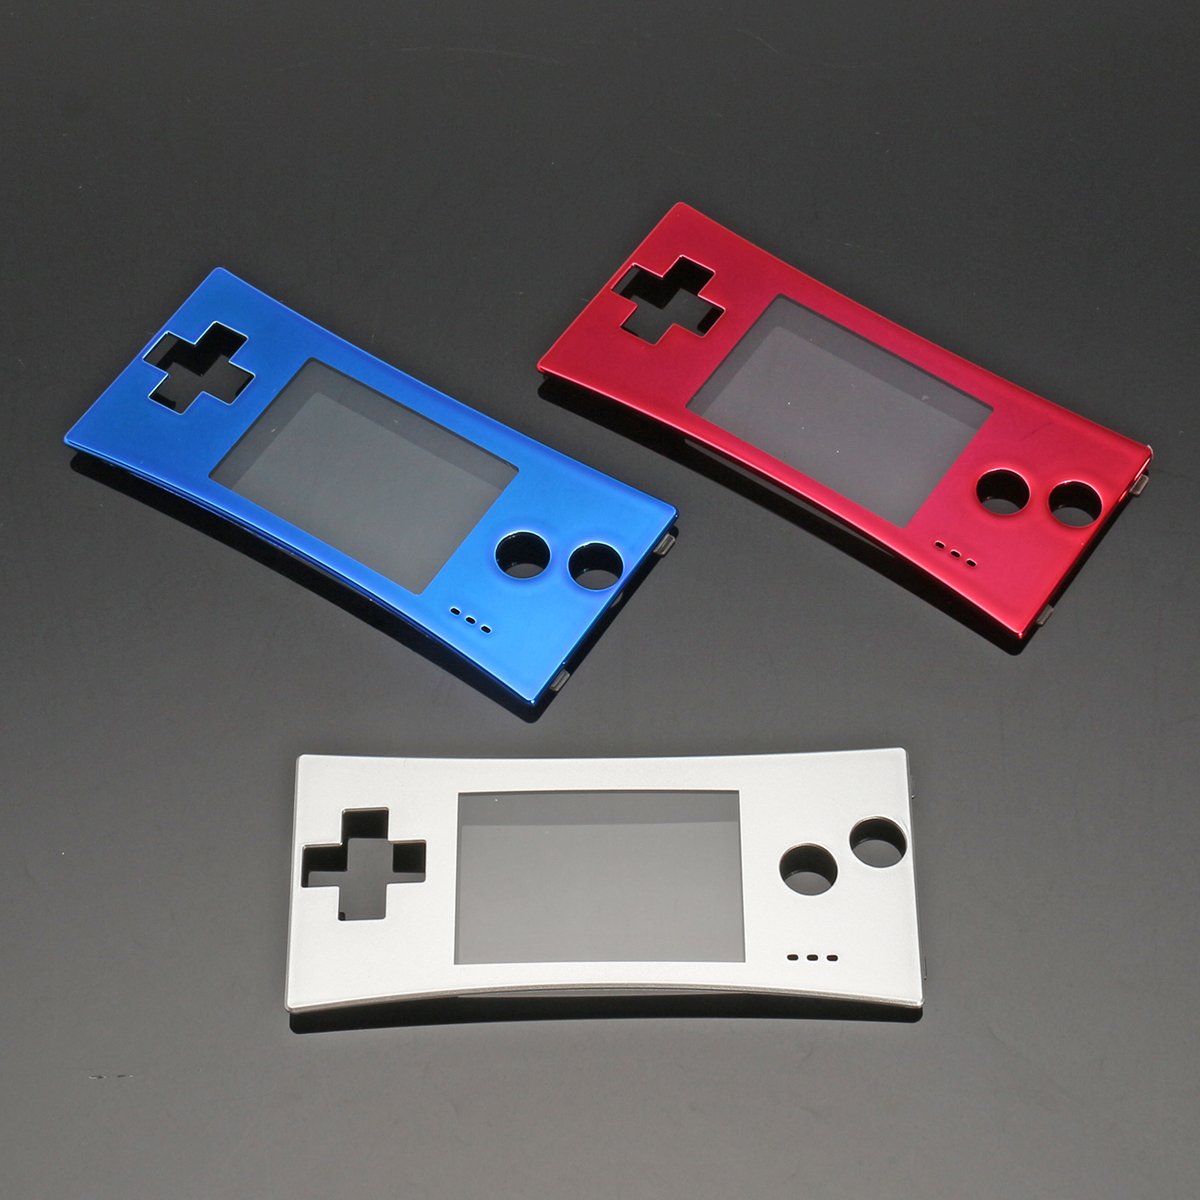 Replacement Front Shell Faceplate Cover Case Part For Nintendo Gameboy Micro GBM 2